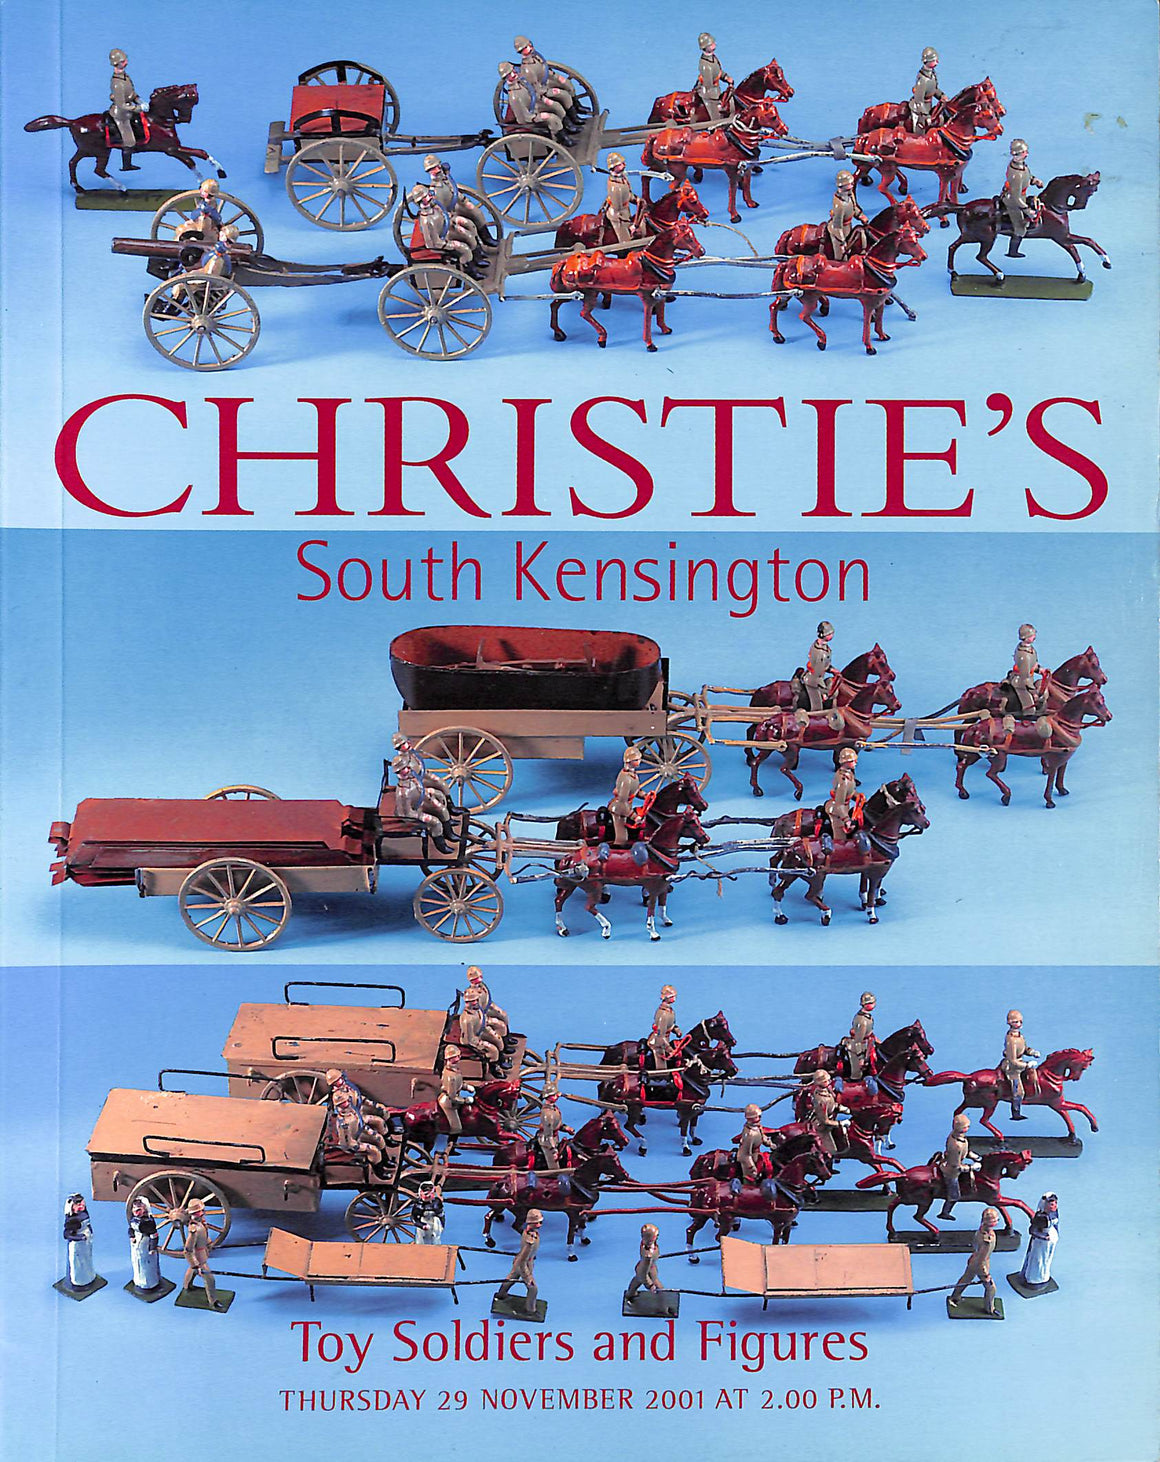 Toy Soldiers And Figures 2001 Christie's South Kensington